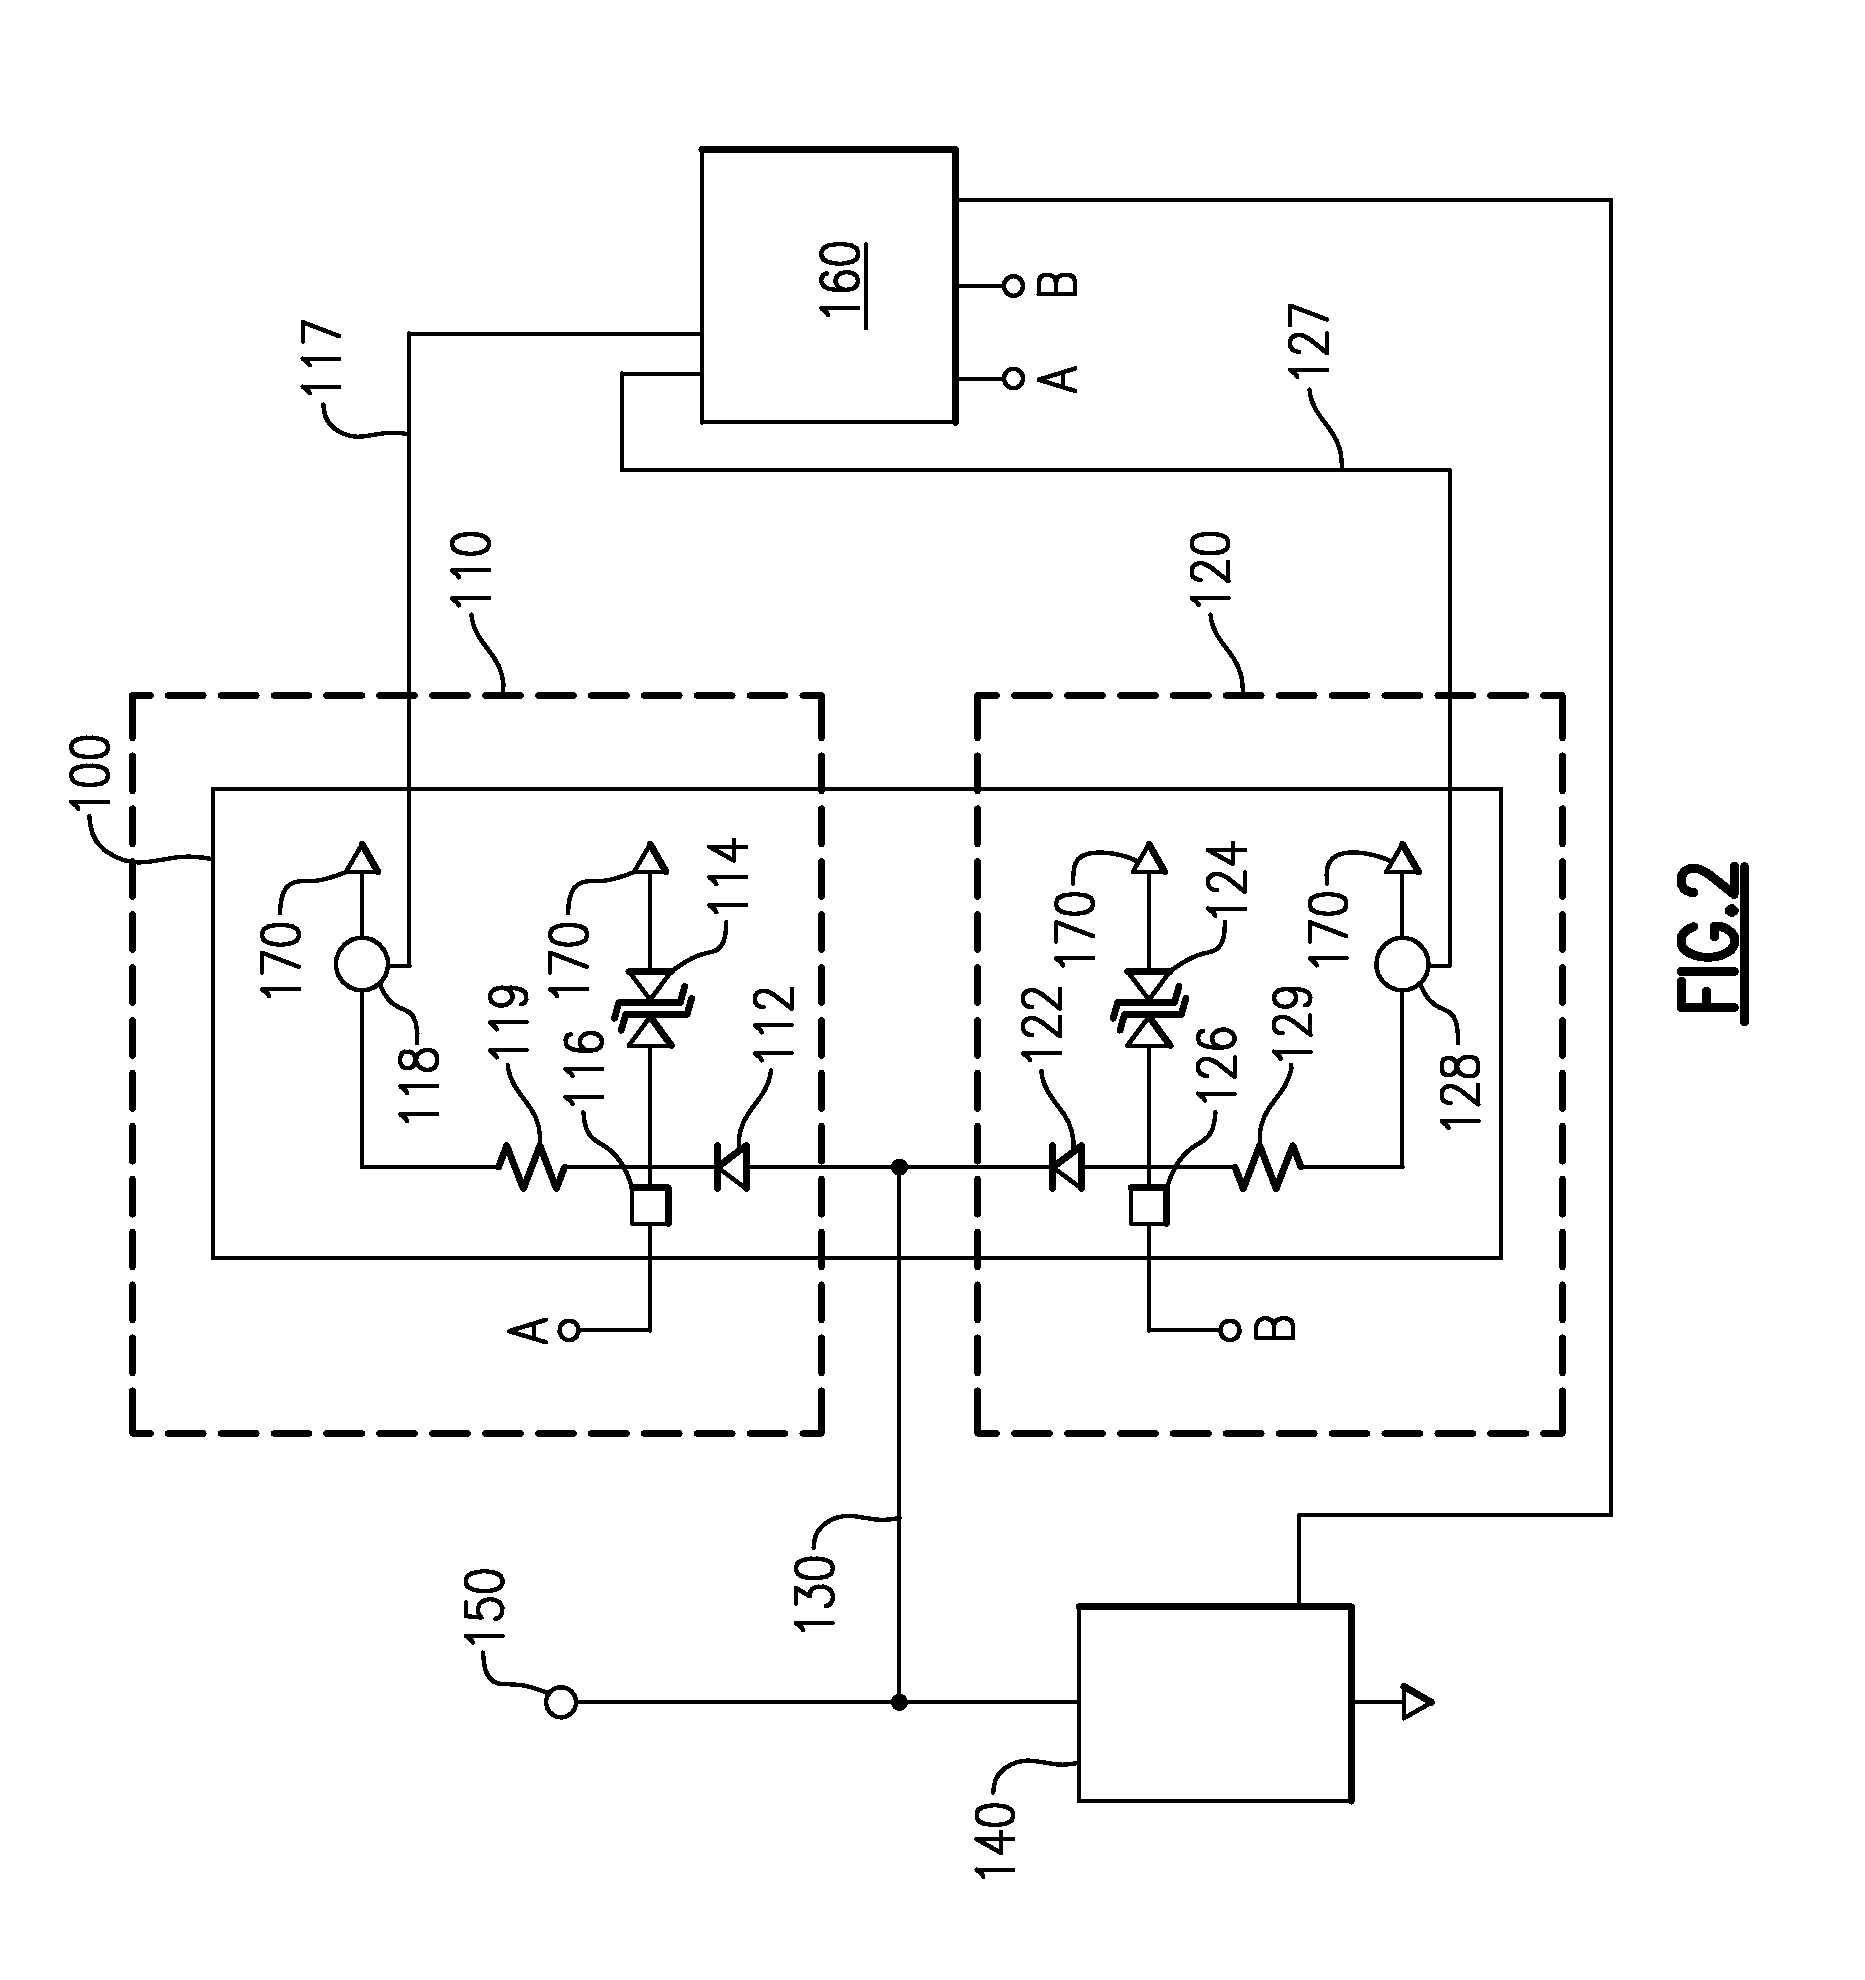 Transient voltage suppression protection circuit including built in testing